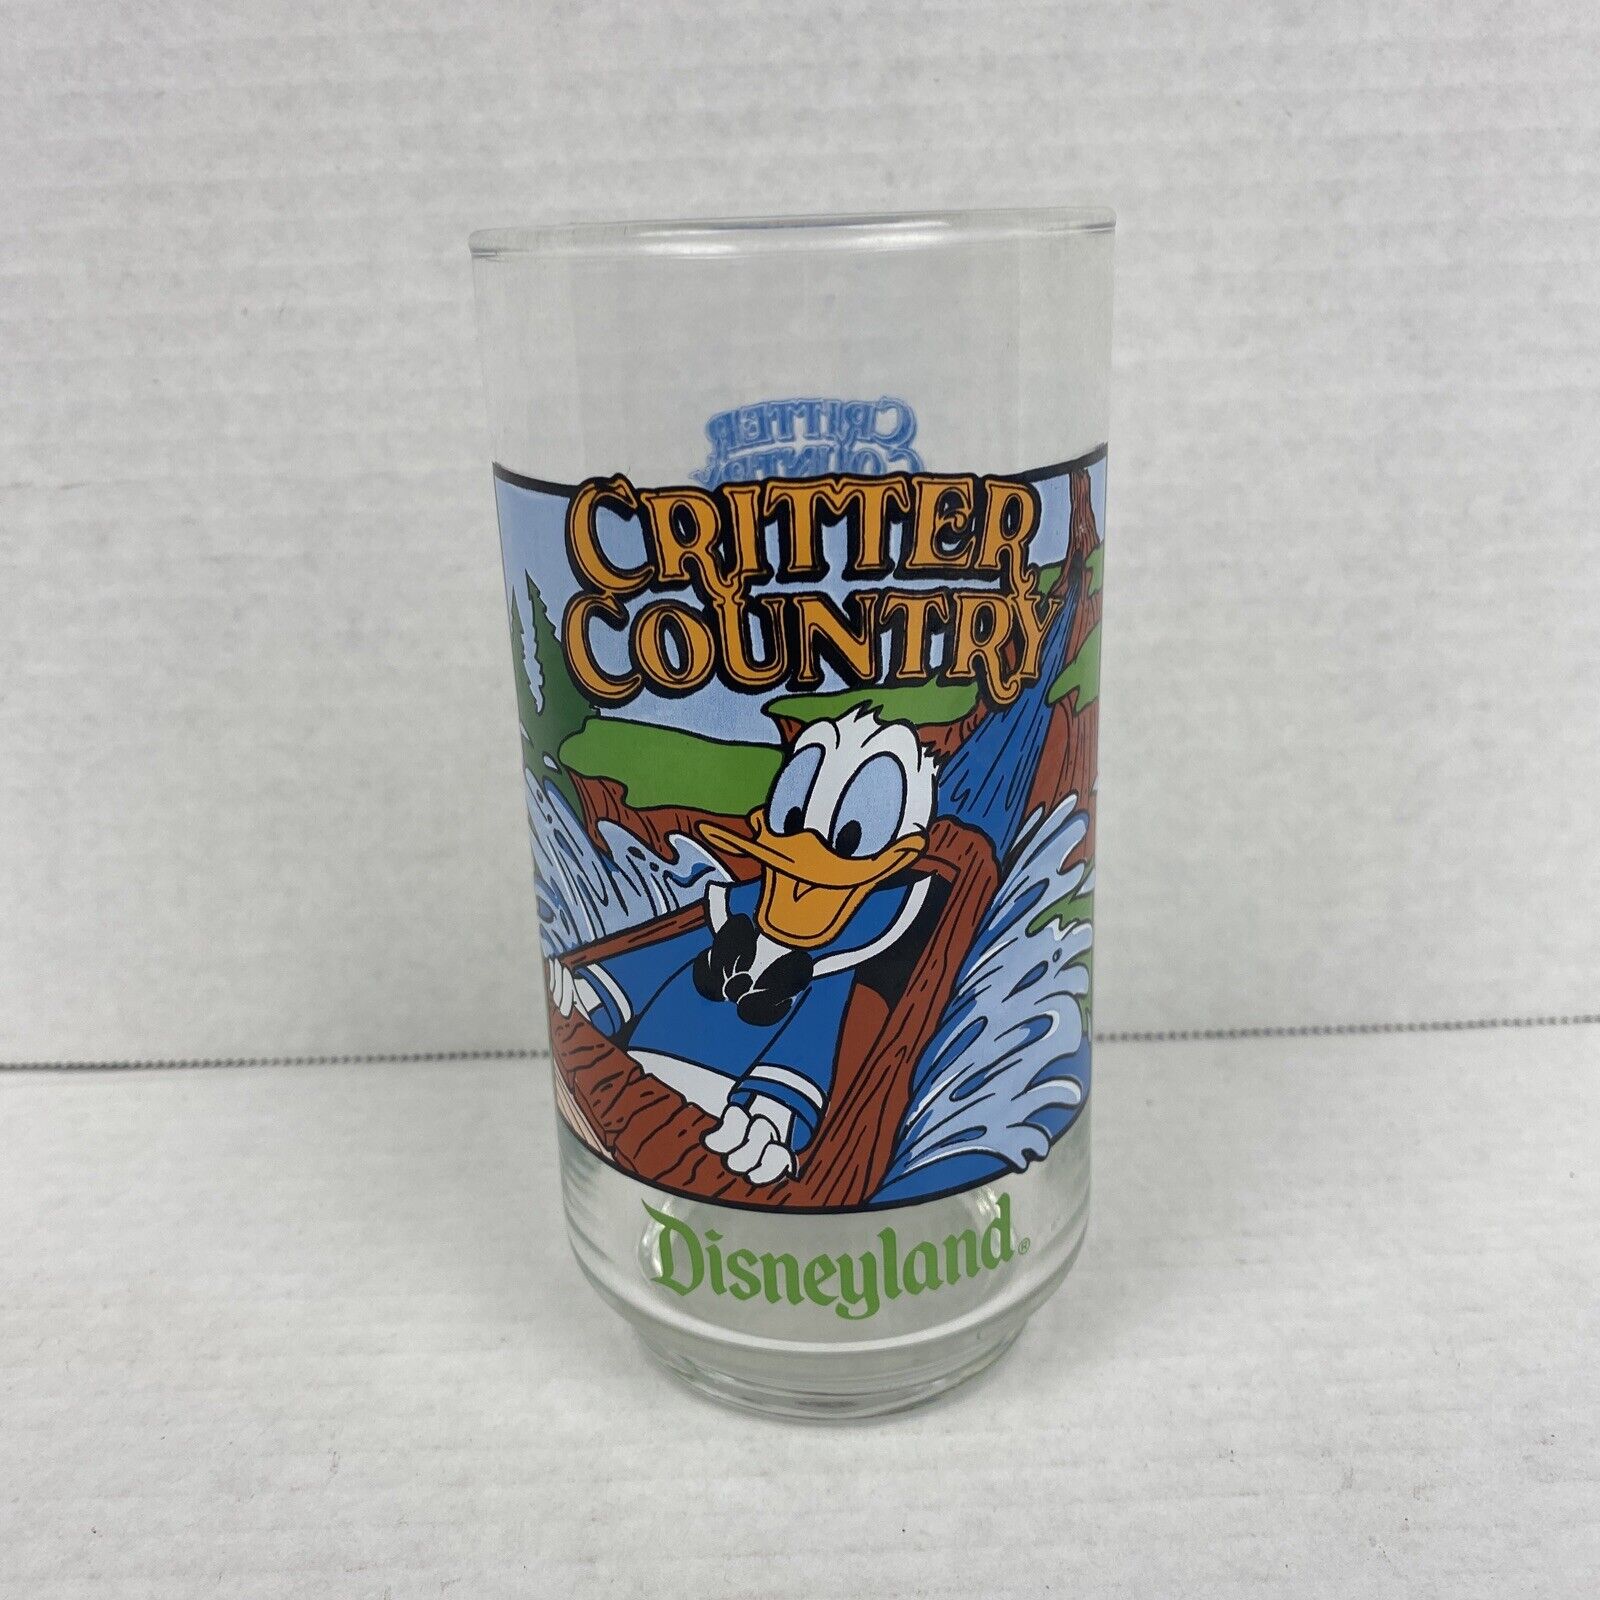 Critter Country Disneyland Glass 1989 McDonald’s Donald Duck Vtg Collectible